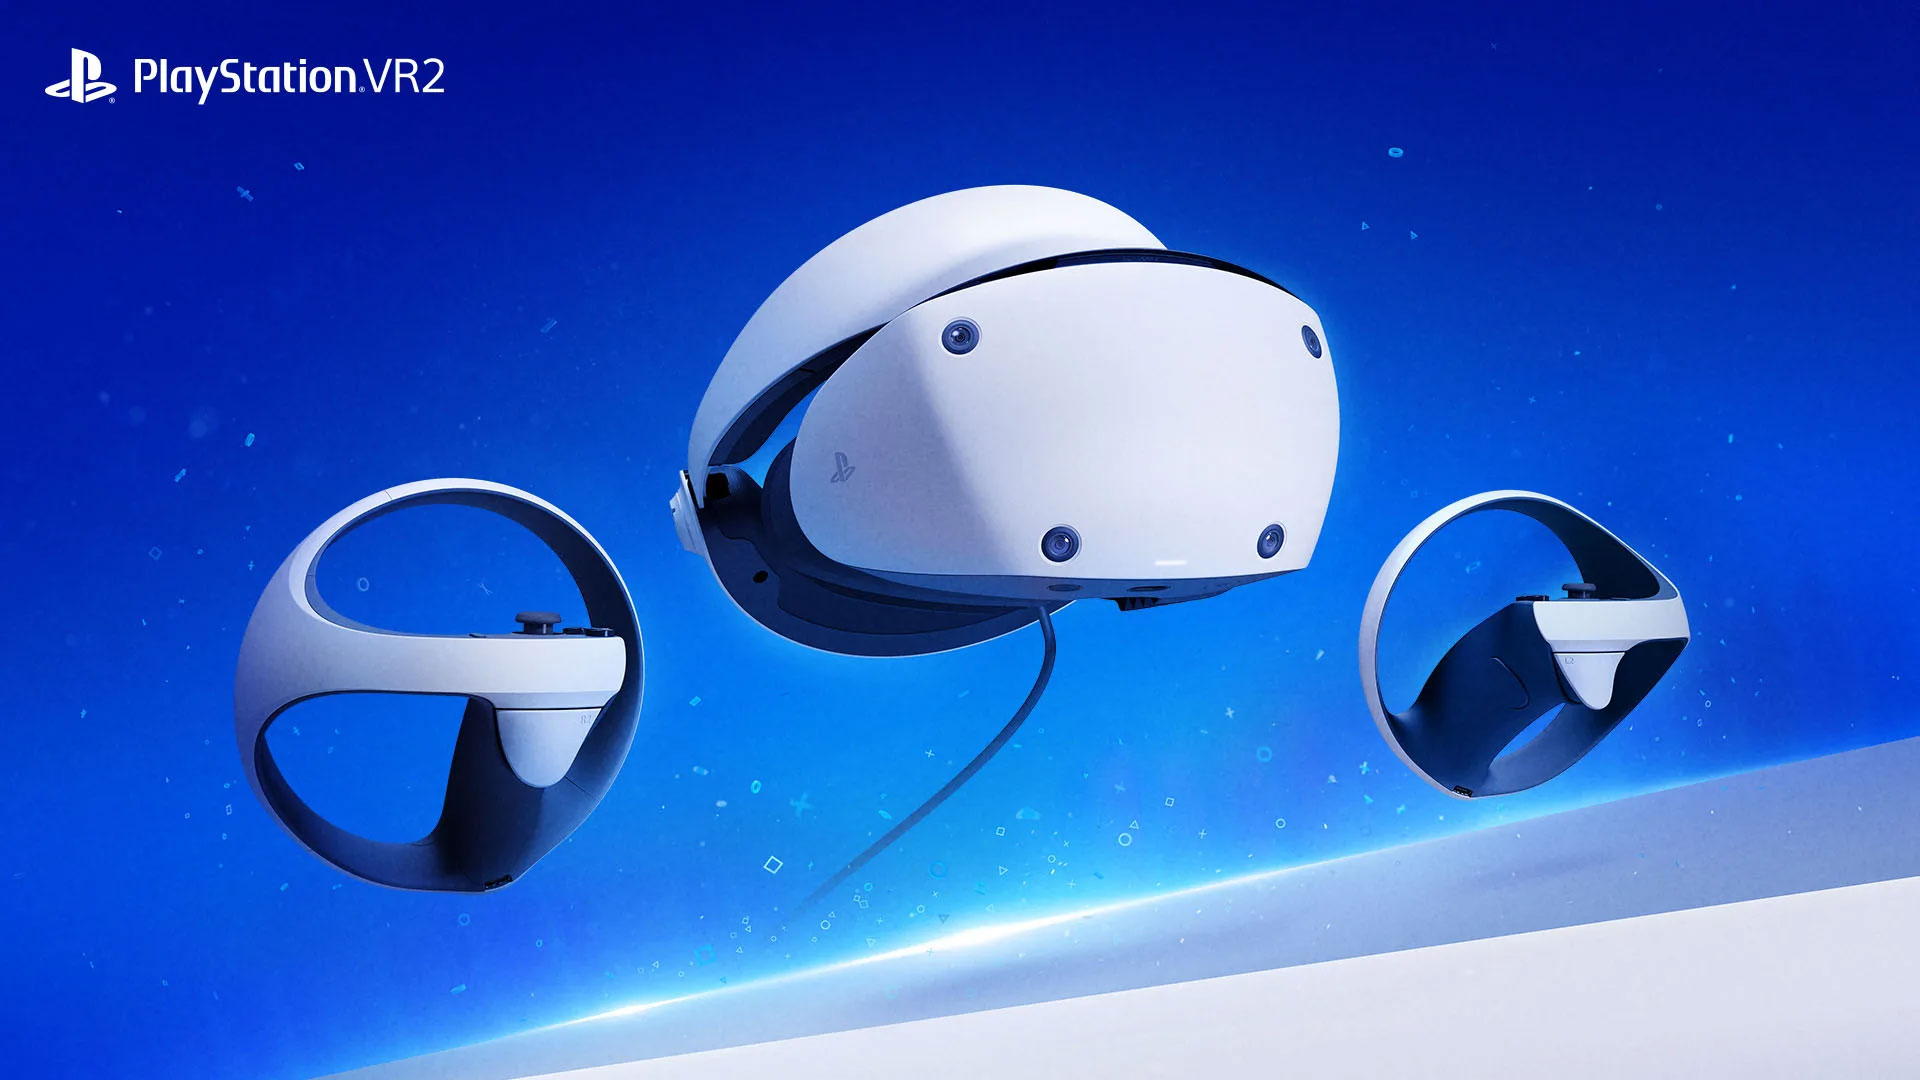 Sony has confirmed the PS VR2 could be heading to PC this year